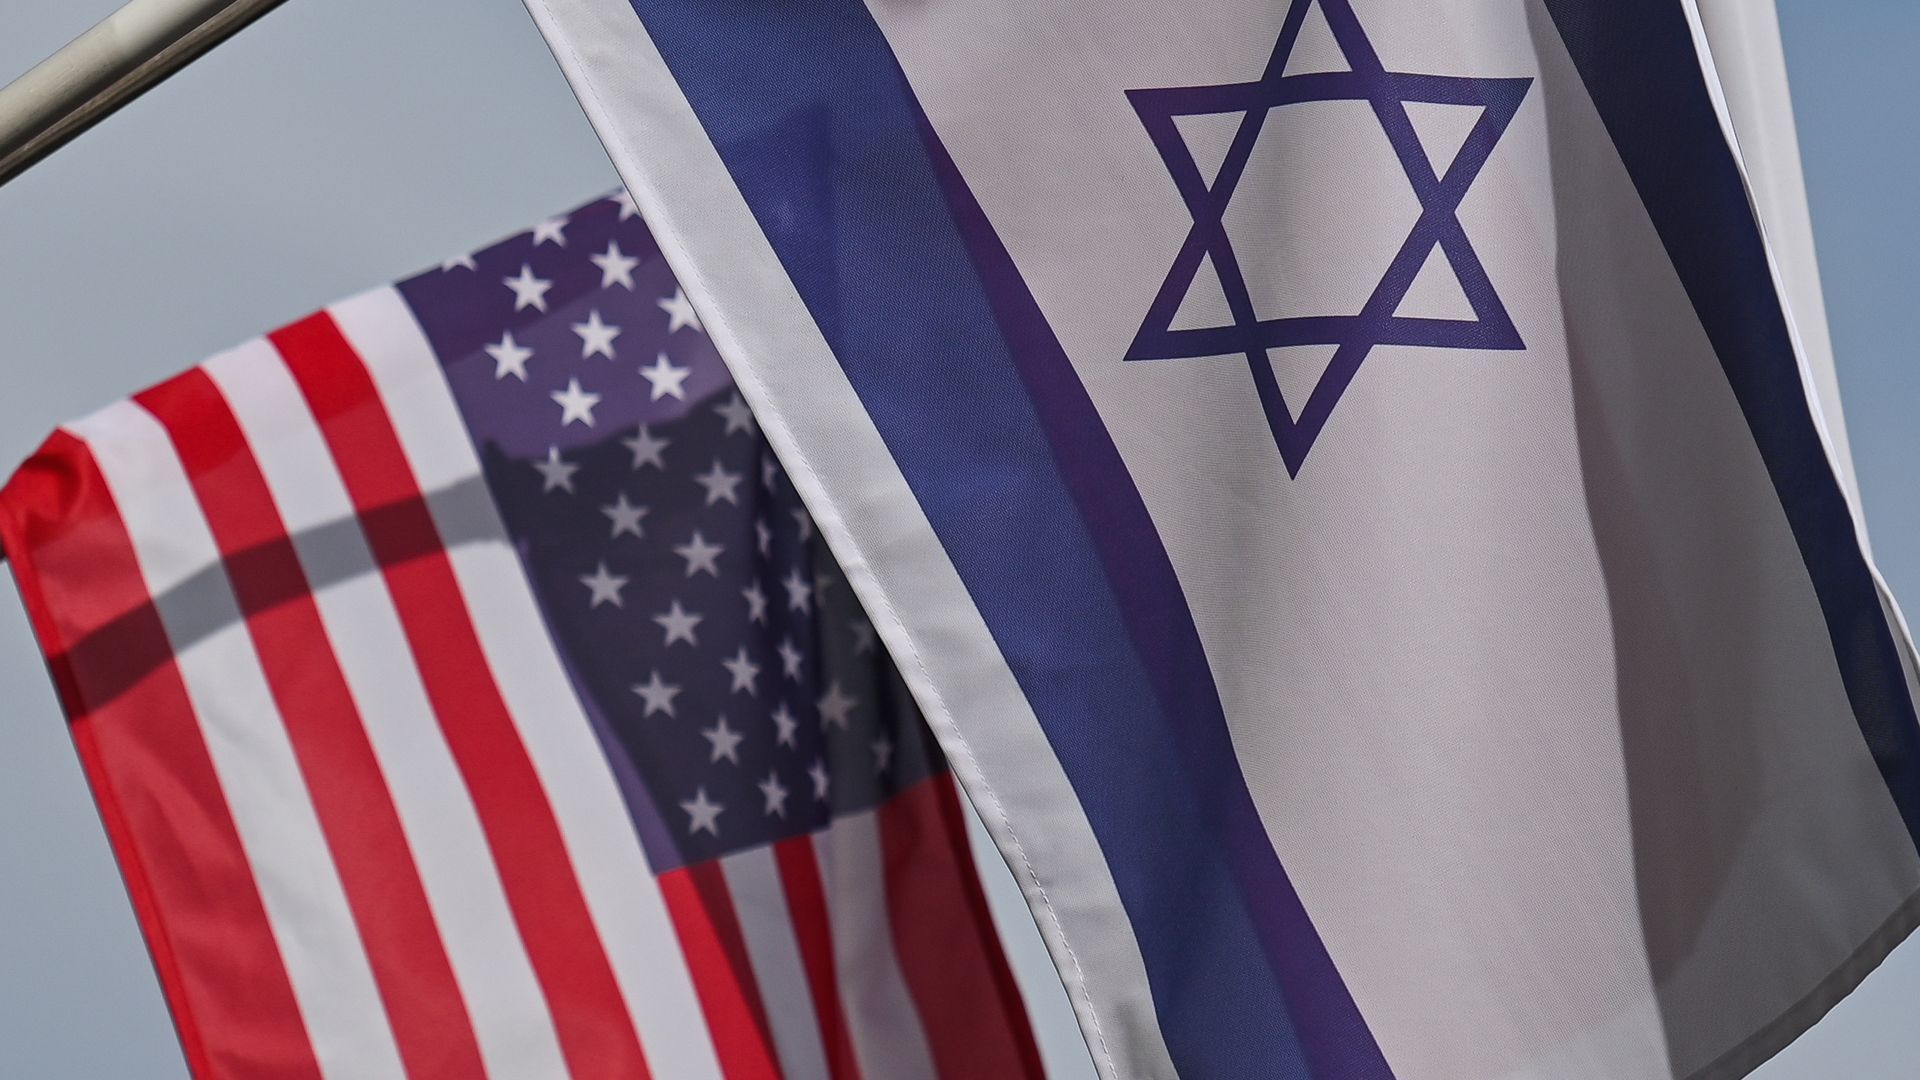 The flags of the U.S. and Israel. Photo: Artur Widak/NurPhoto via Getty Images